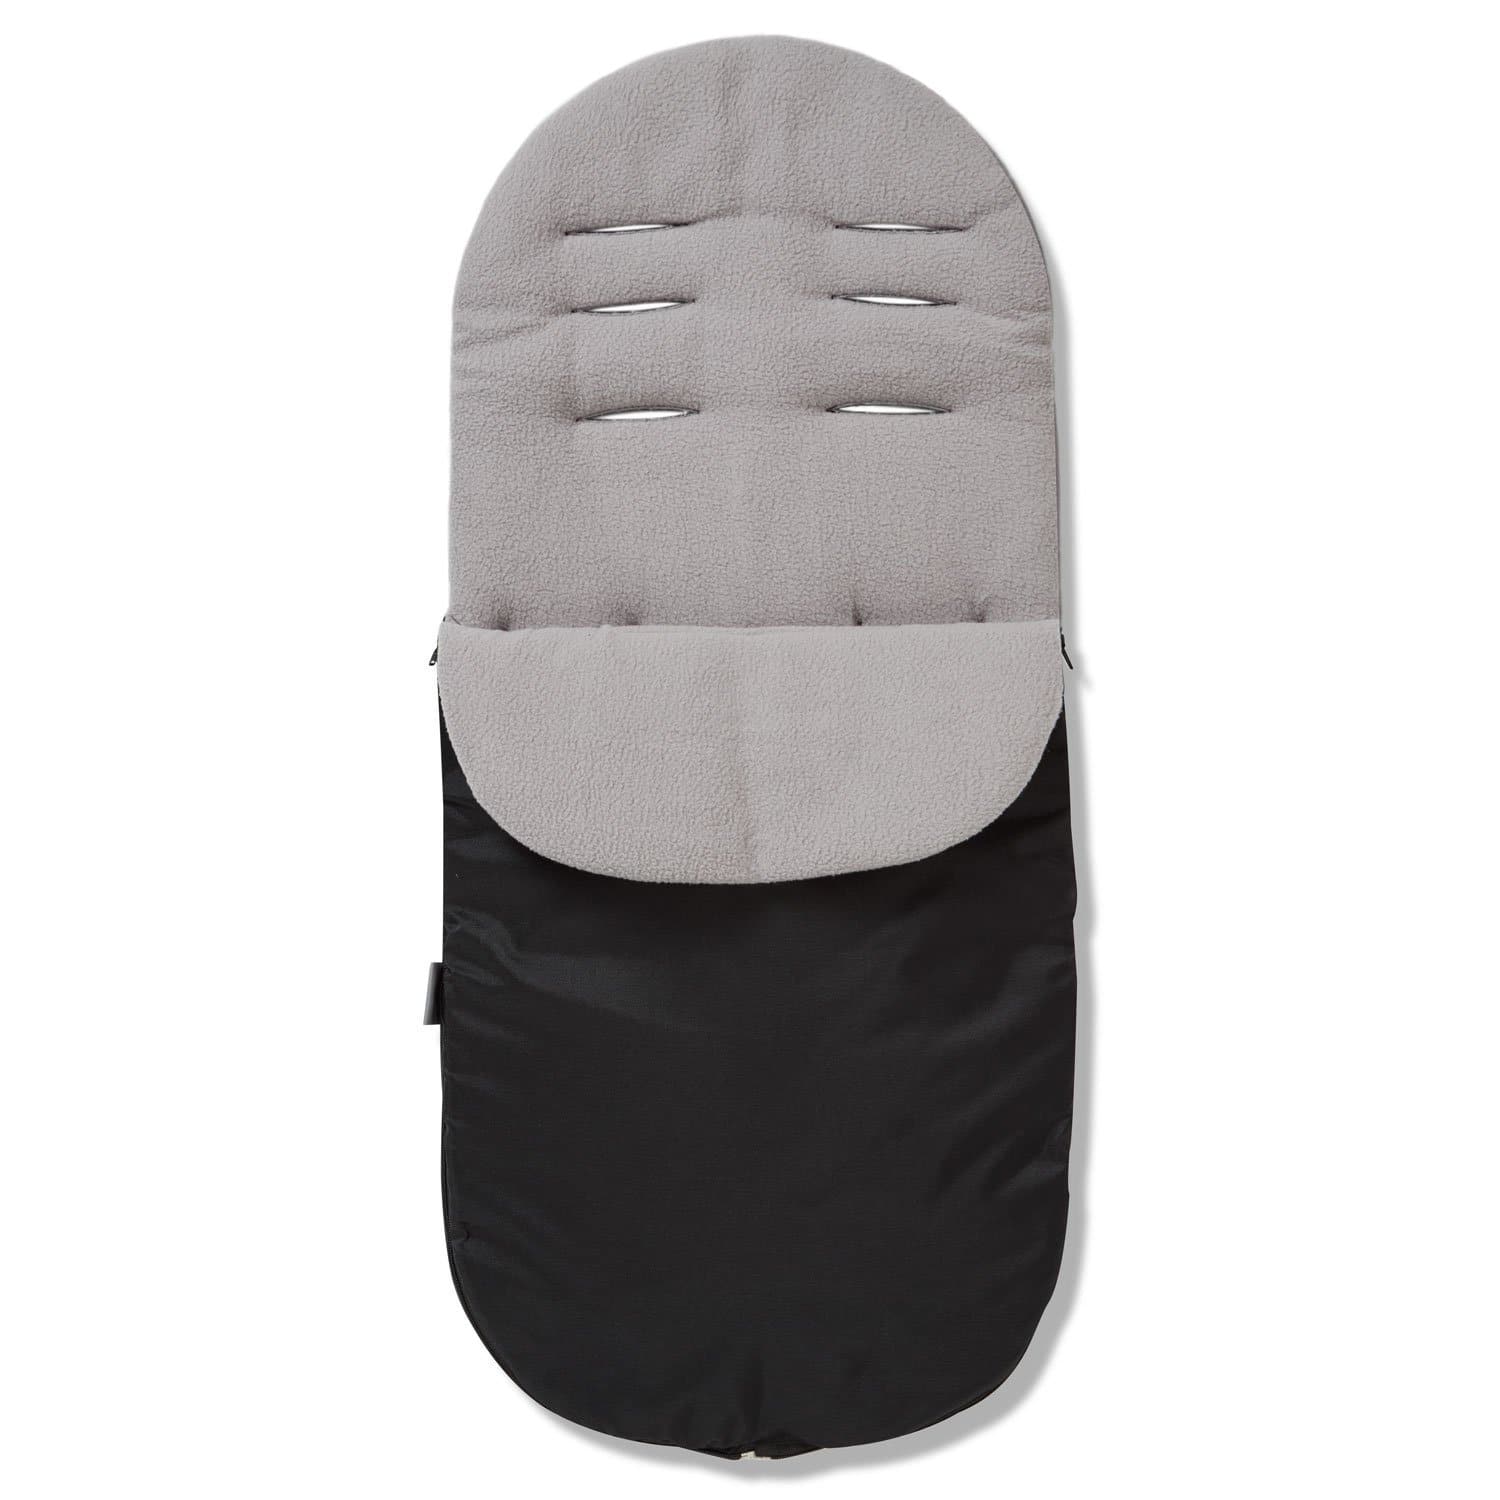 Footmuff / Cosy Toes Compatible with Brevi - Grey / Fits All Models | For Your Little One